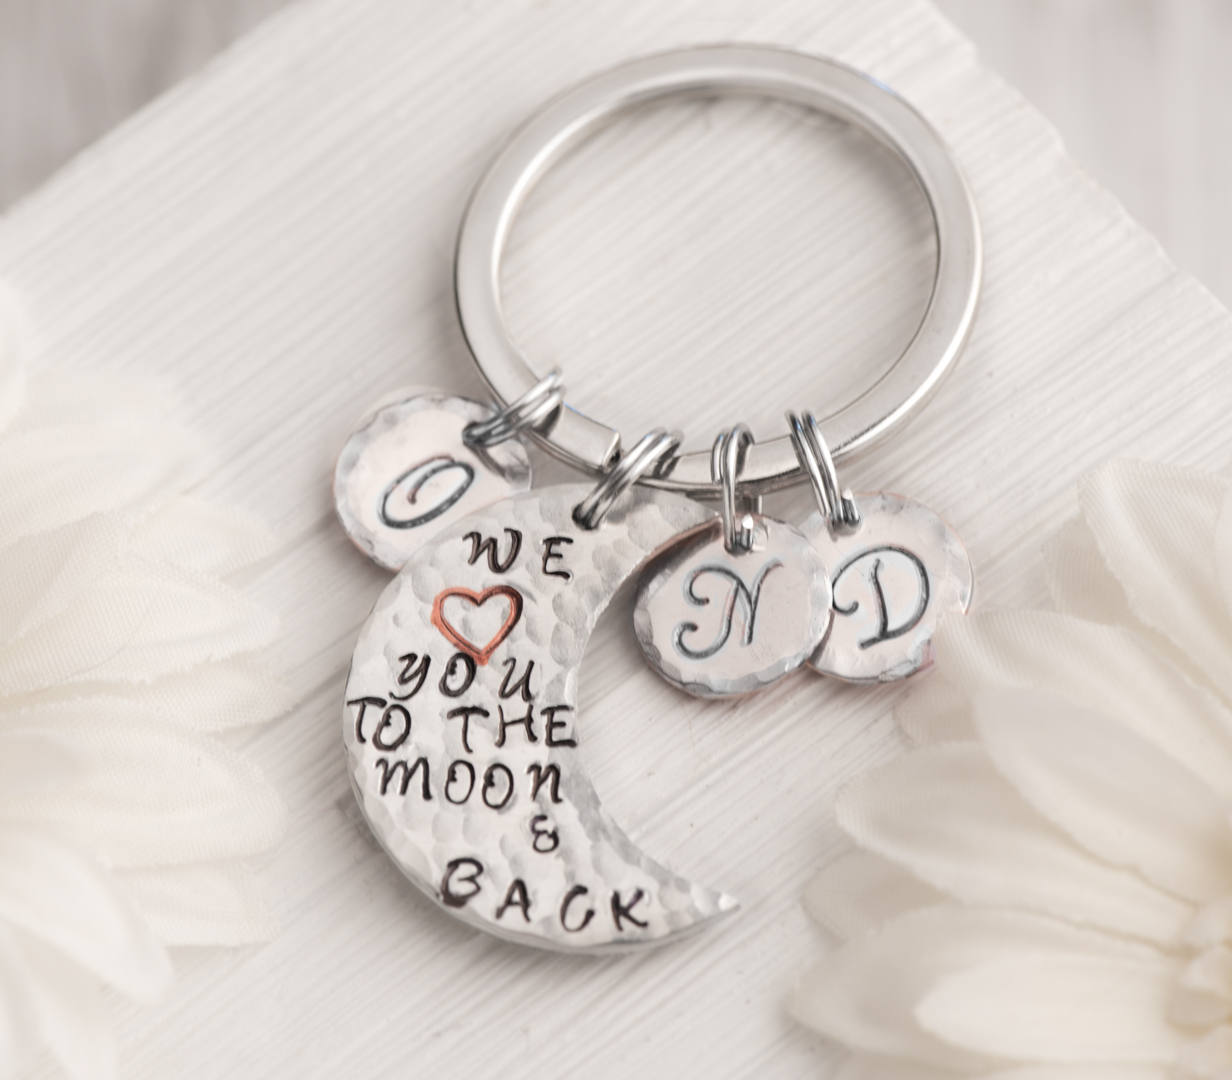 Hand stamped custom engraved keychain, mothers day keychain, gift for mom of 5 kids, we love you engrave keychain, the moon and back gift, mom from daughter, silver moon keychain